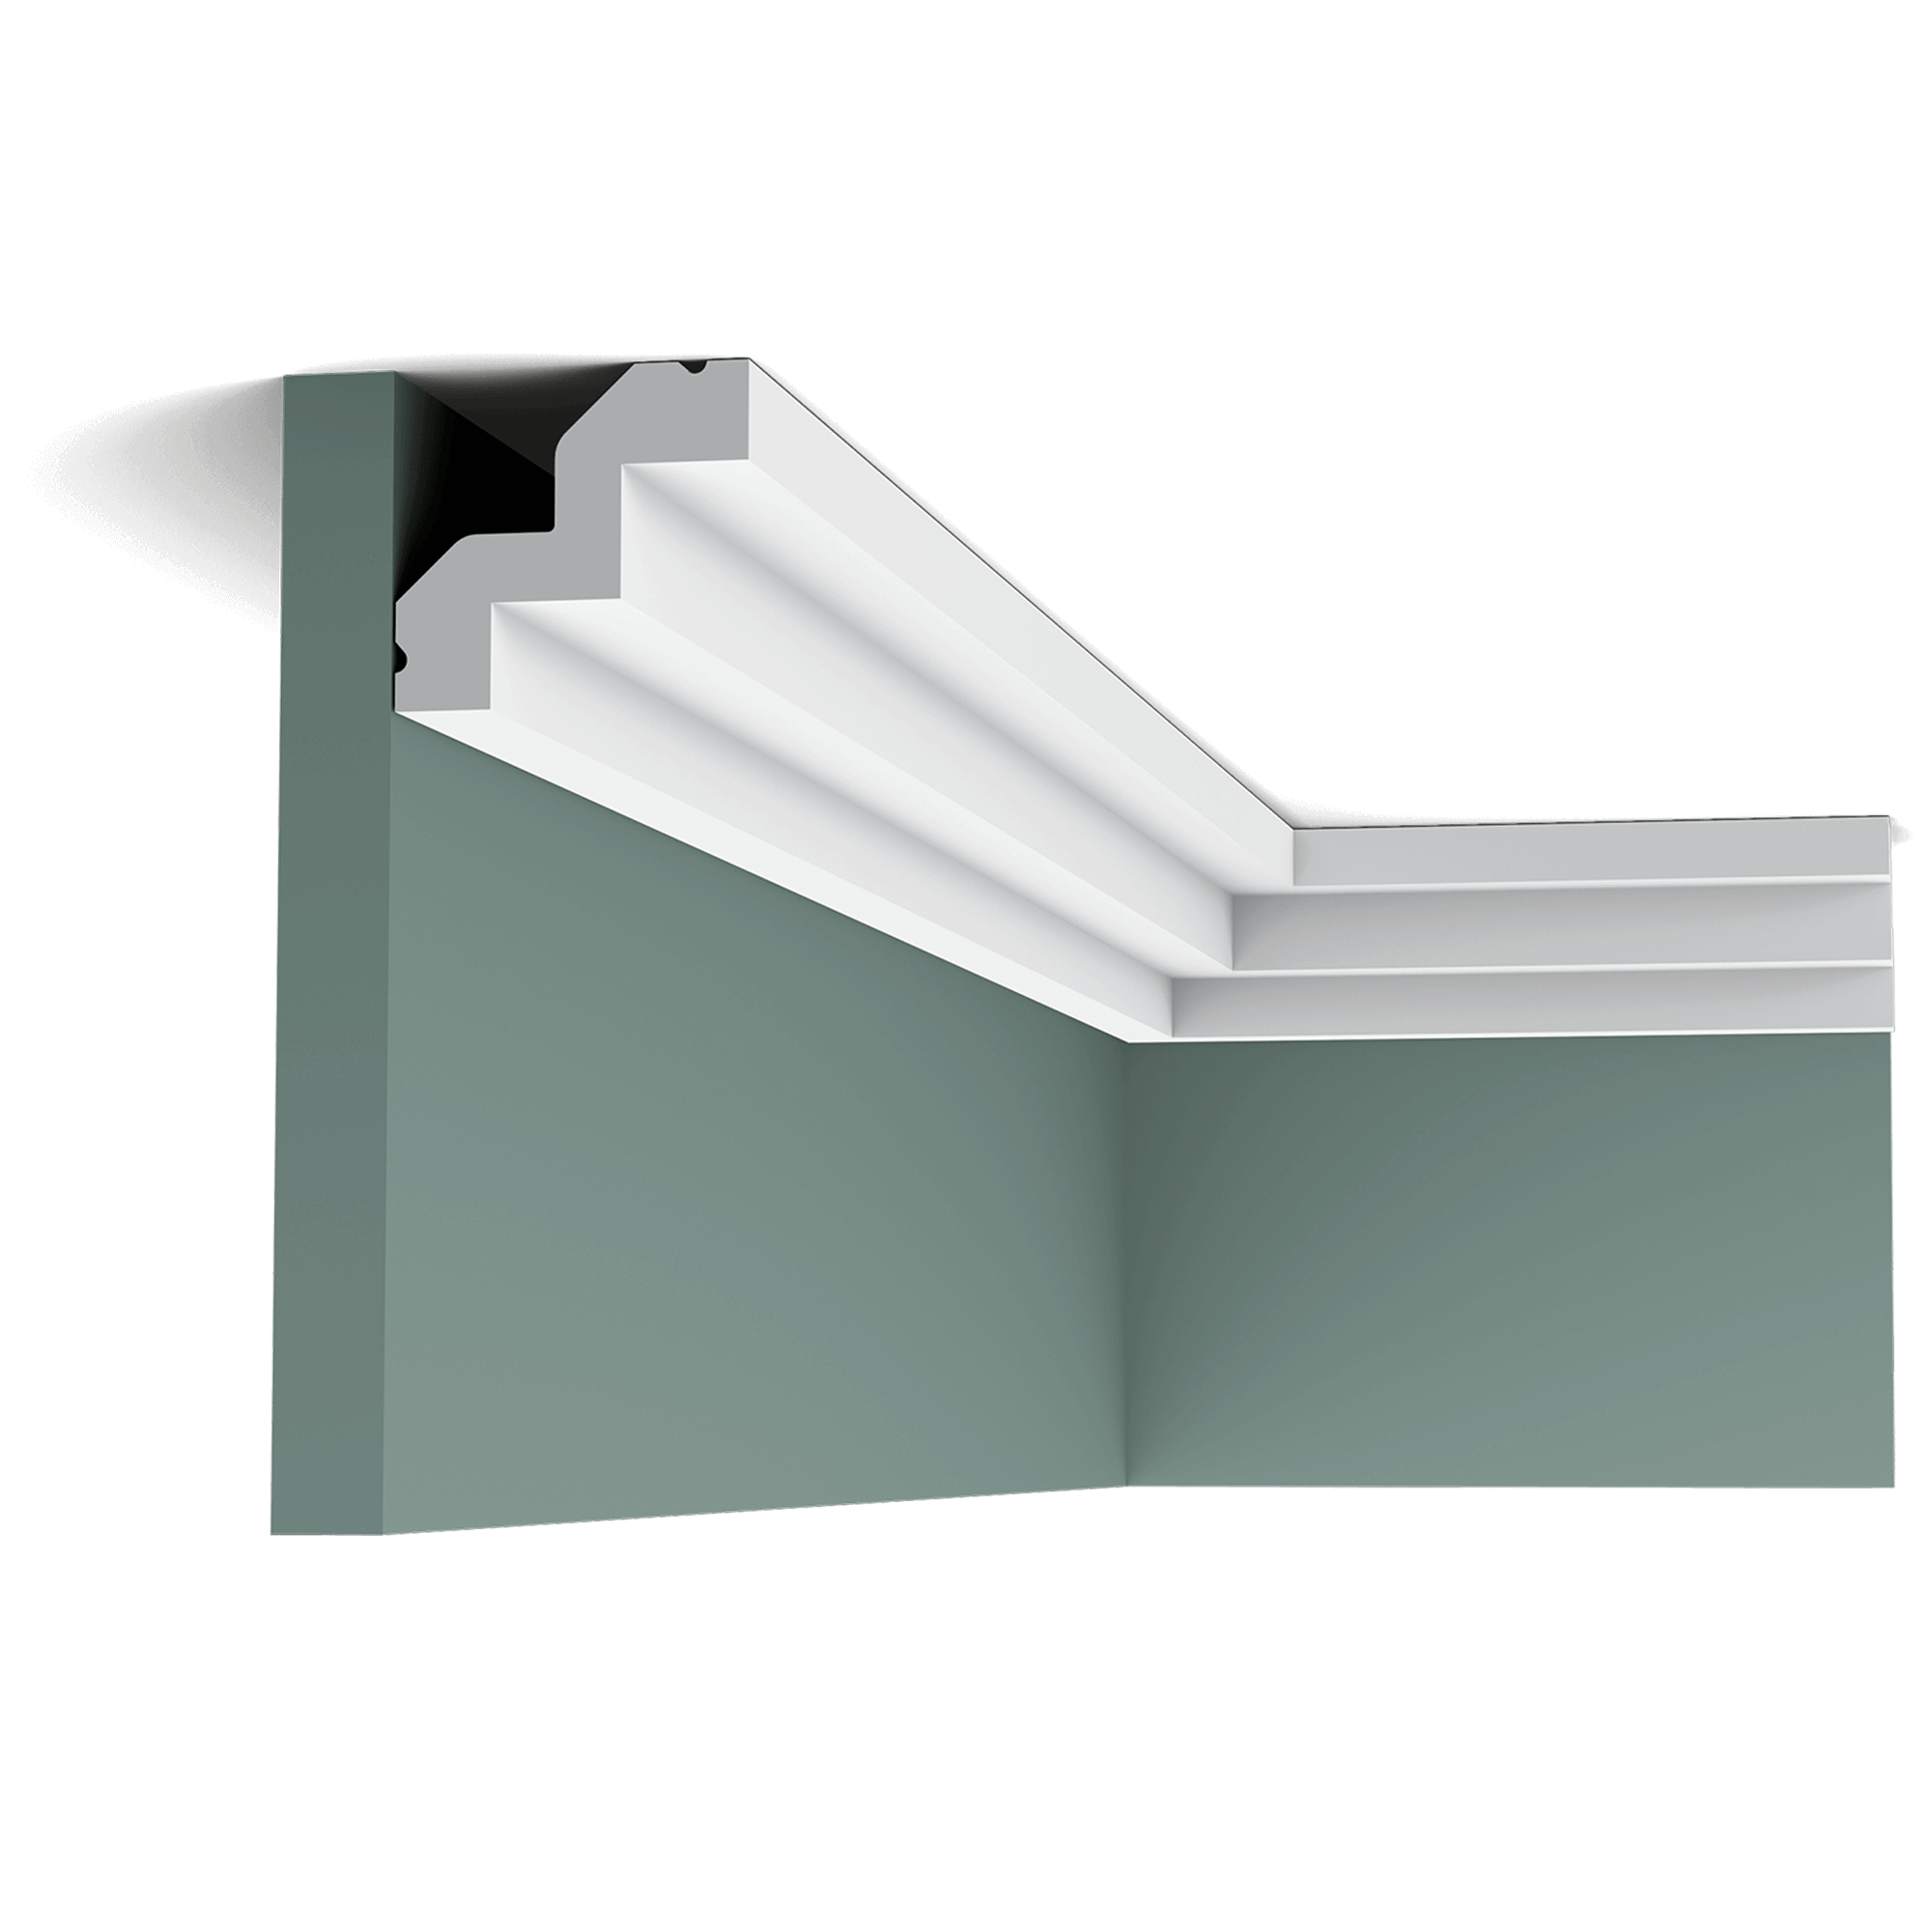 c602 cornice moulding 6b30 Cornice moulding in the Art Deco style. Creates an elegant, stepped transition between wall and ceiling.